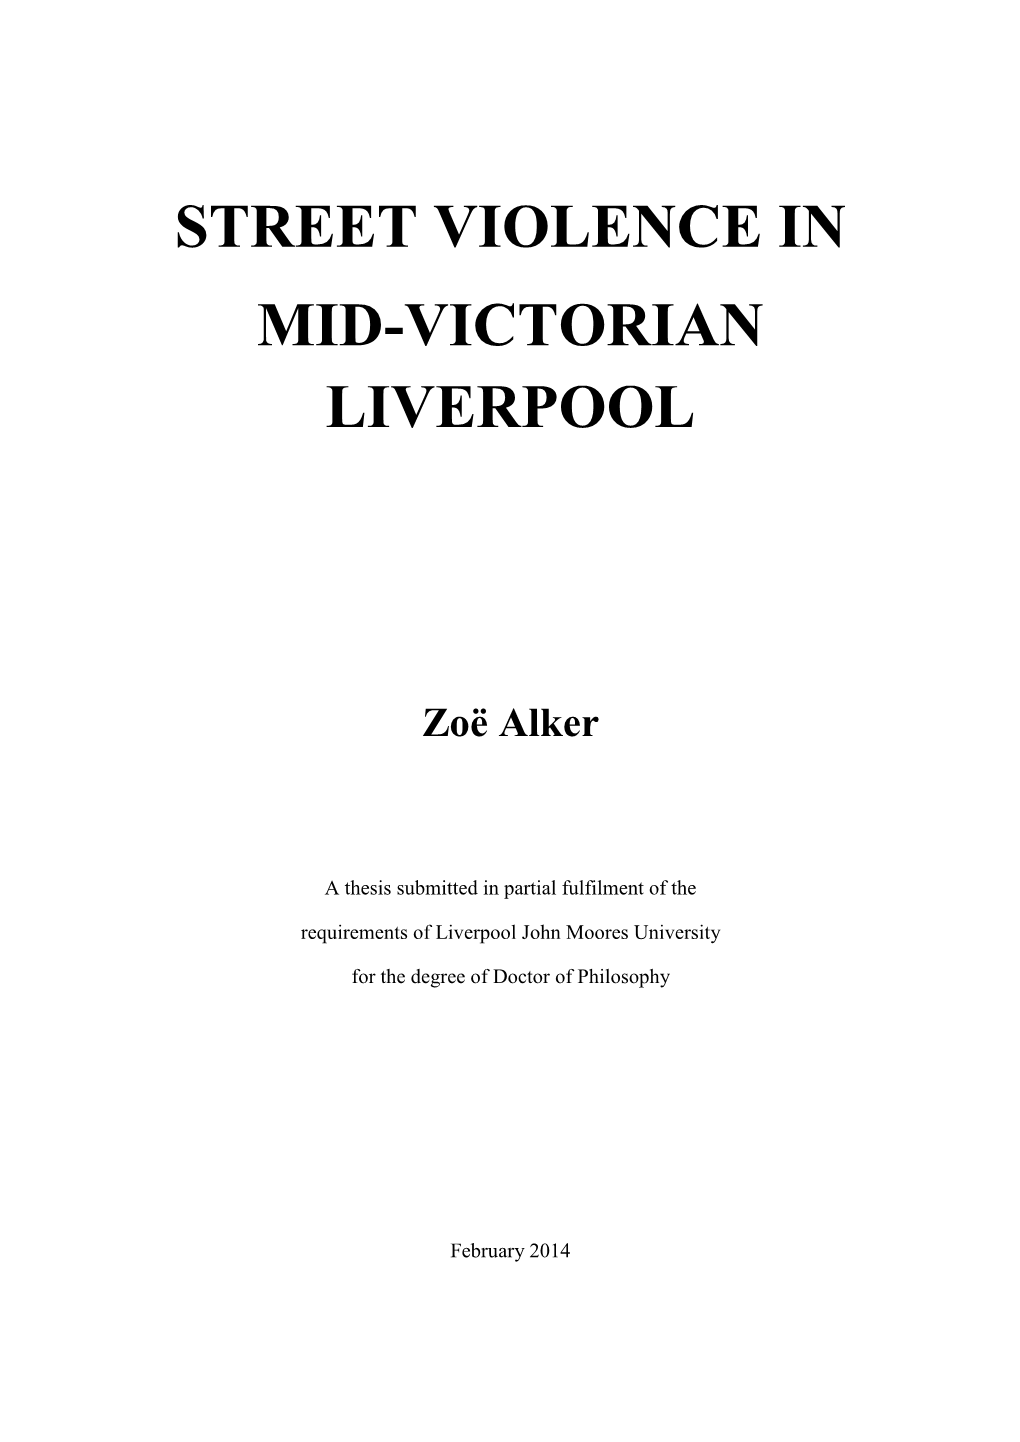 Street Violence in Mid-Victorian Liverpool